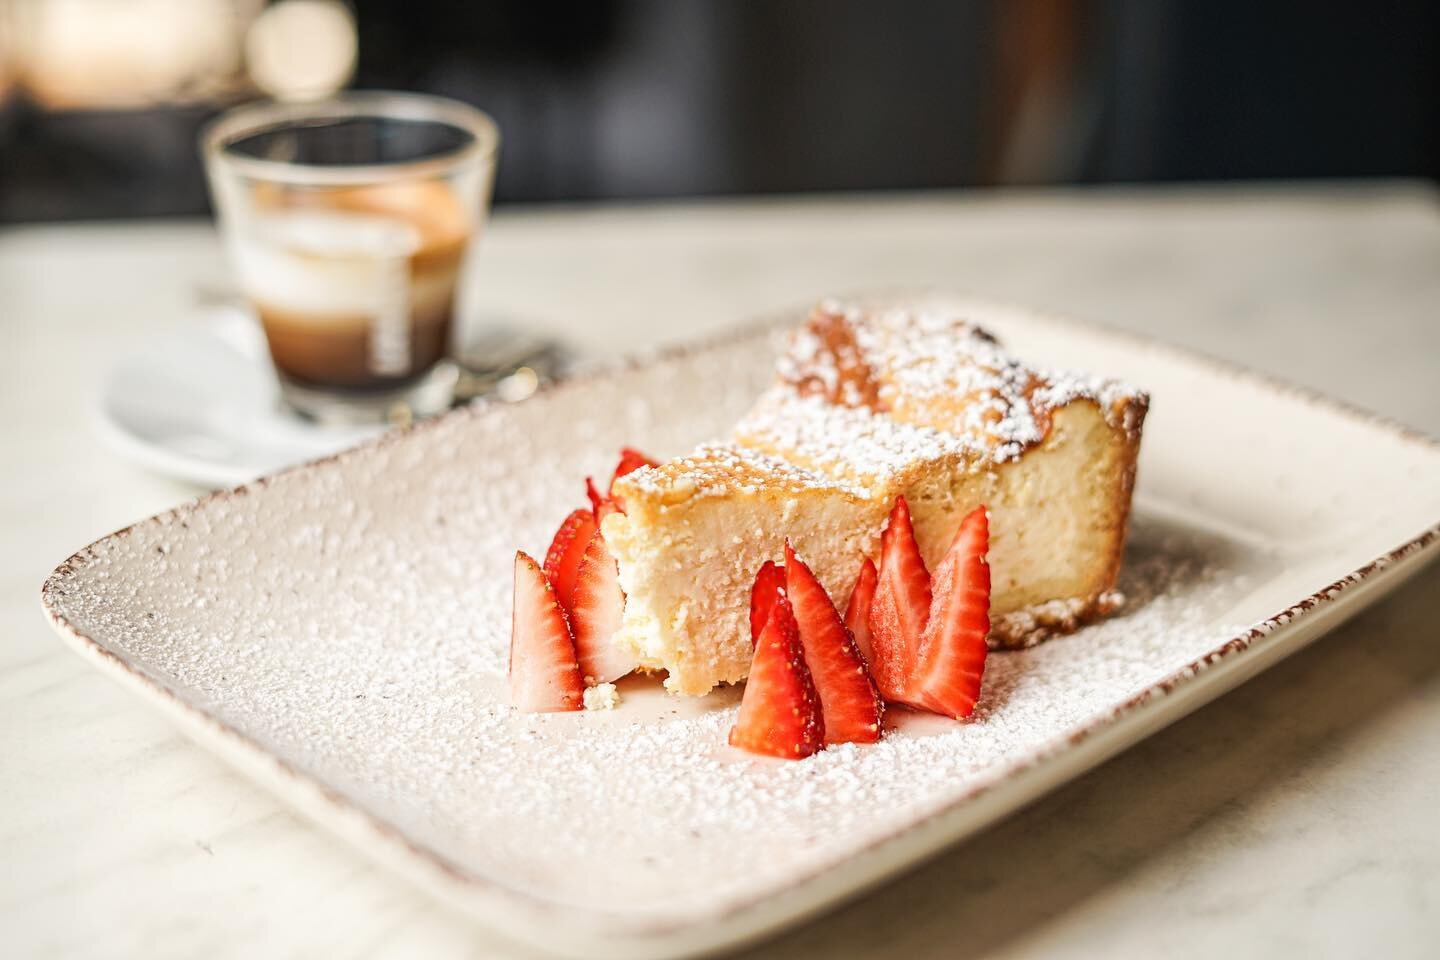 @thelittleitaliancook's signature baked ricotta cheesecake seriously got us drooling! 🍰 Trust us, if you're on the hunt for Sydney's best ricotta cheesecake, this is it.